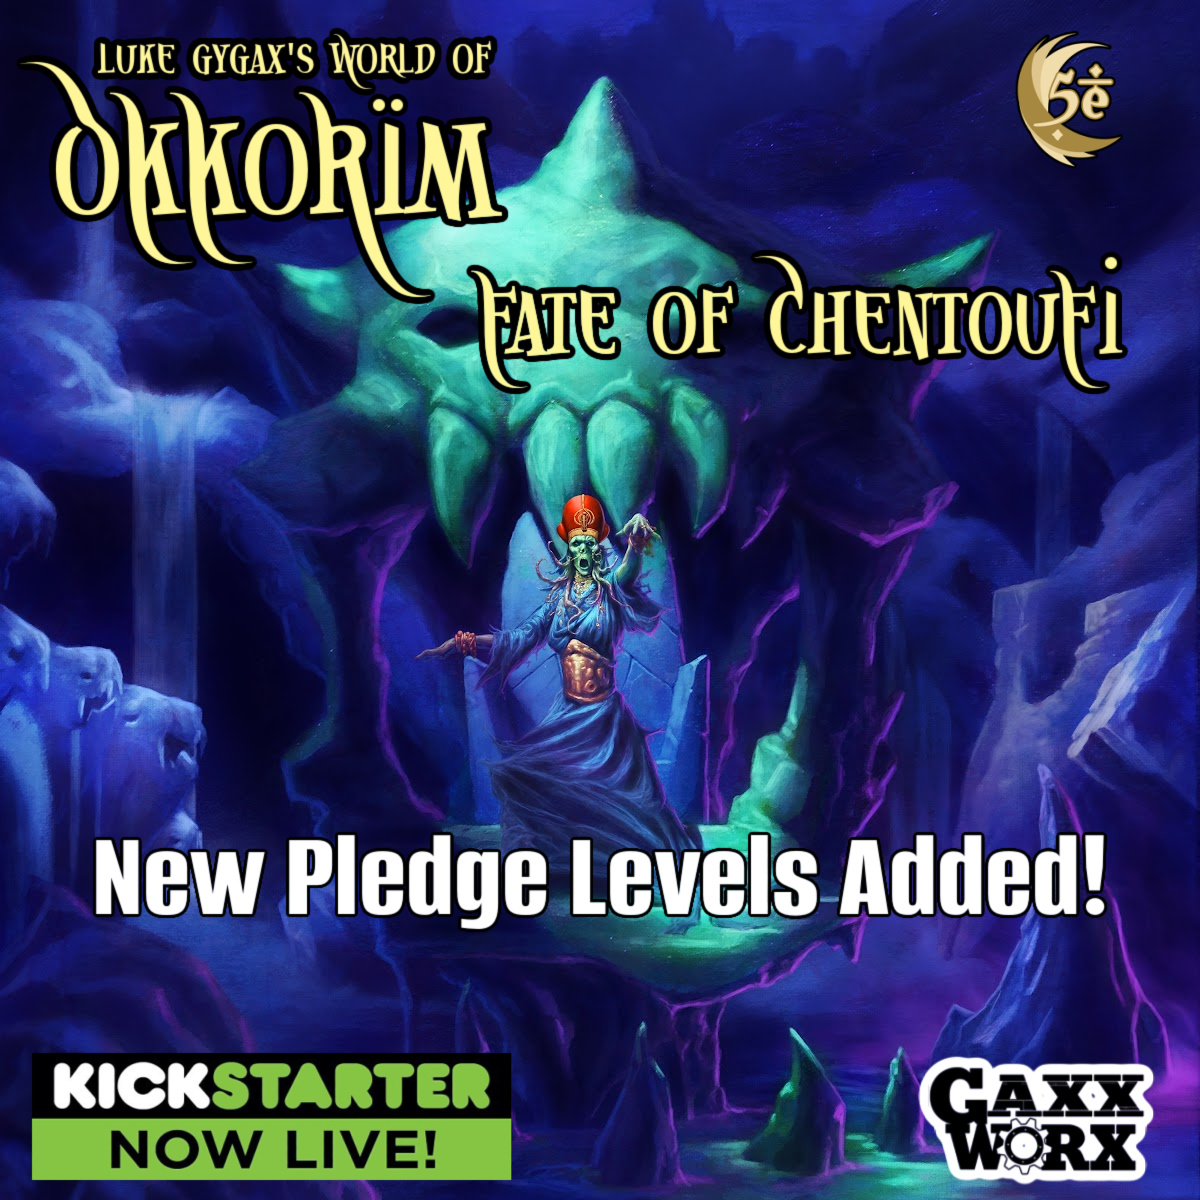 We added another live game with Luke Gygax at Gamehole Con (thanks to the GHC Crew) and 5 more virtual sessions to our Fate of Chentoufi kickstarter! Back us at ks.gaxxworx.com